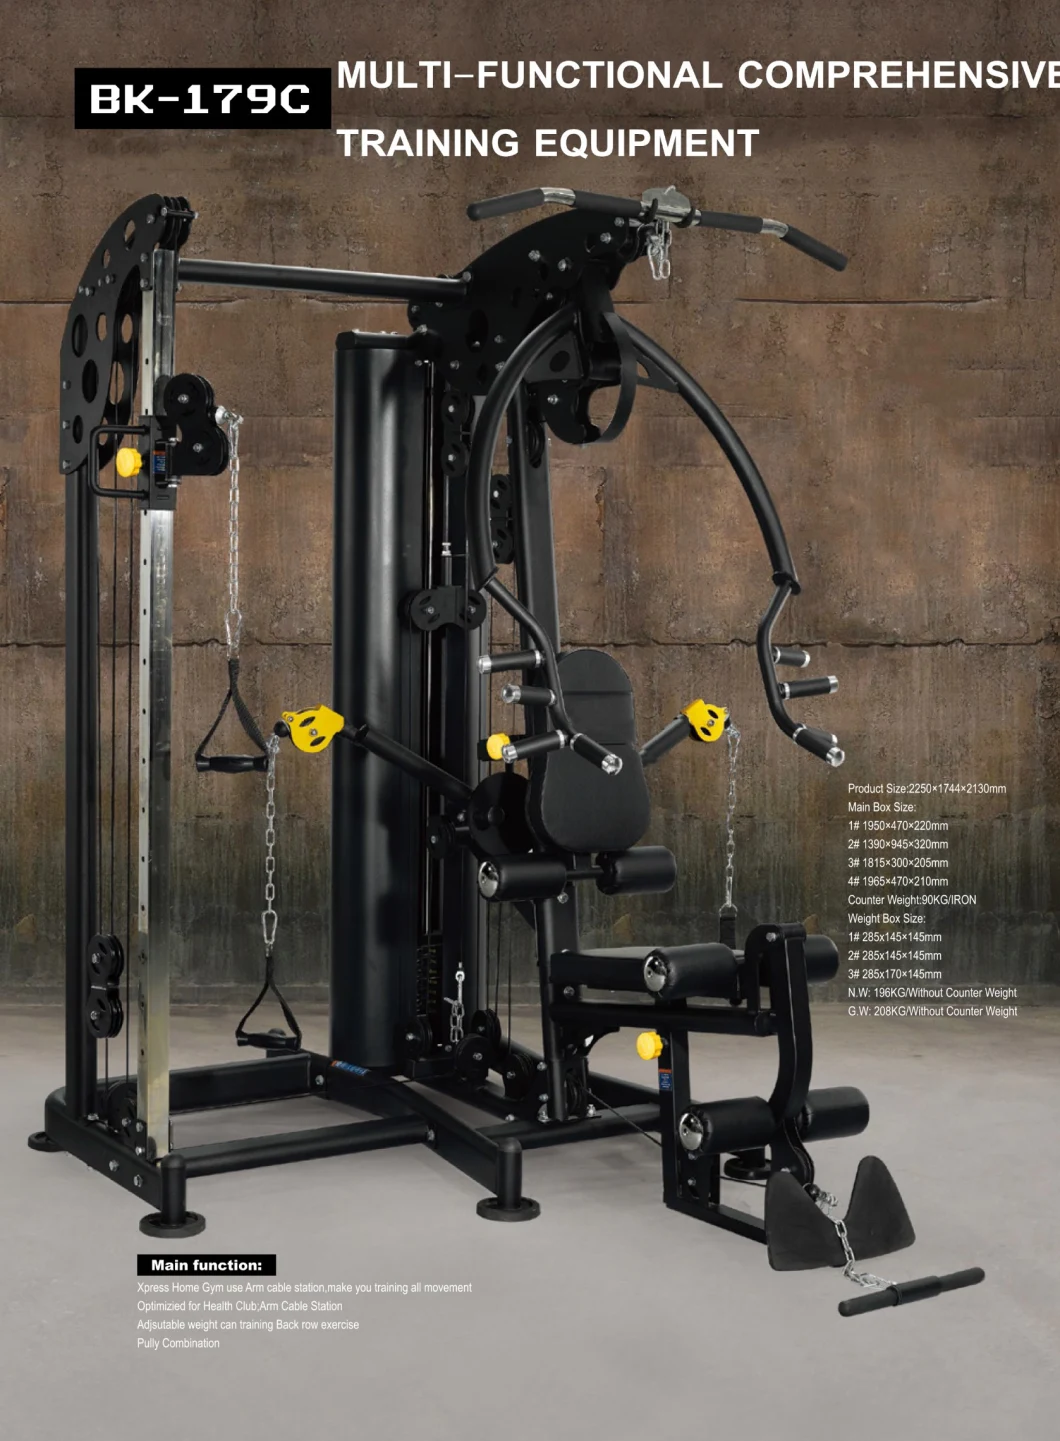 Multi-Function Station Myoung Commercial Fitness Gym Strength Training Equipment